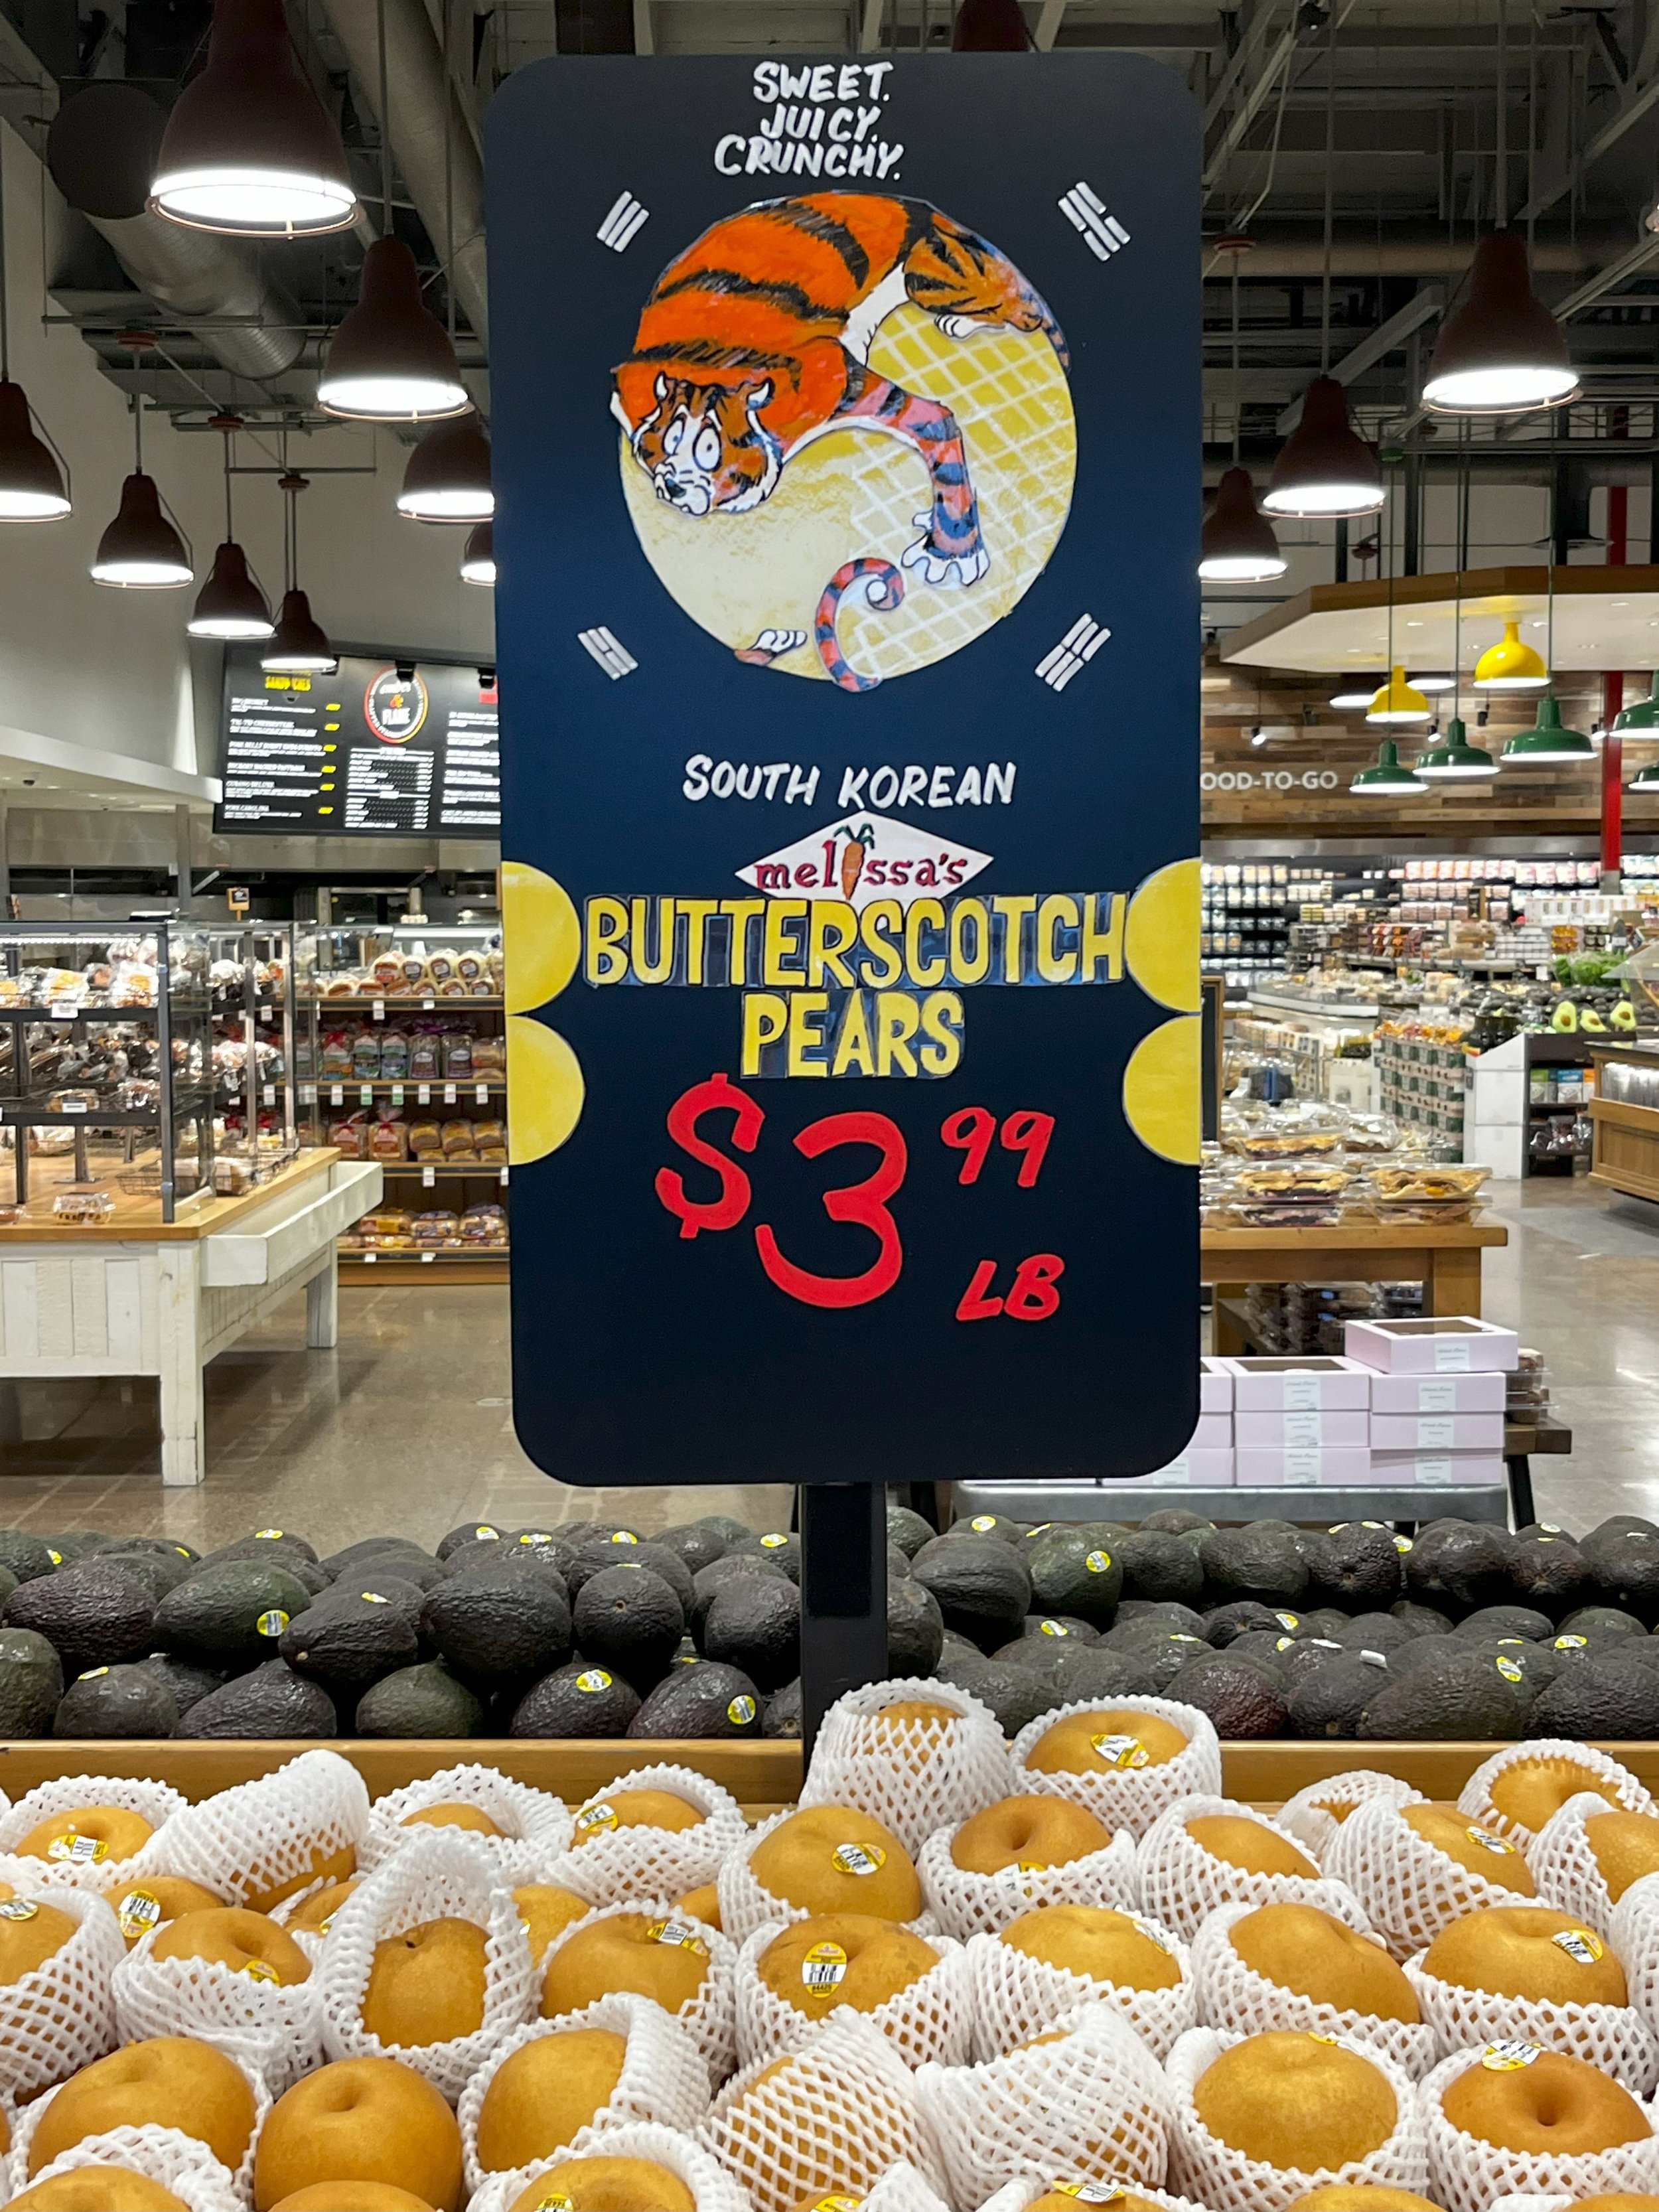 south korean butterscotch pears signage.jpg